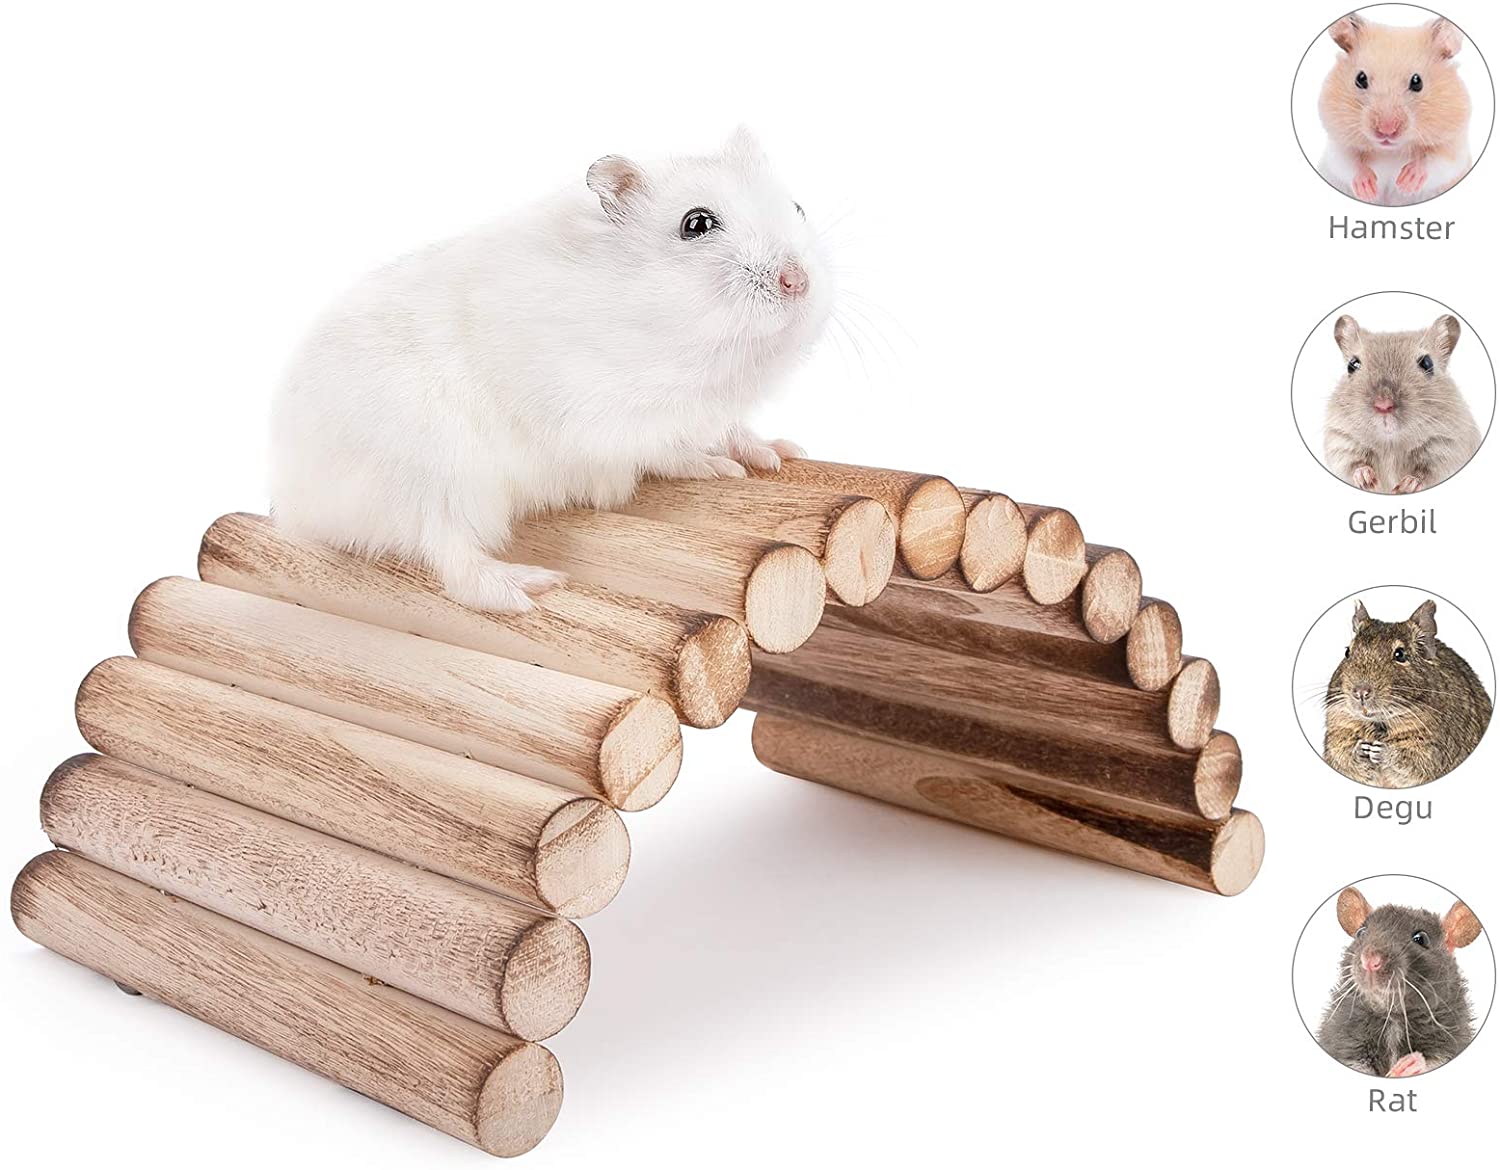 Niteangel Small Animal Climbing Toys - Suspension Bridge Ladder for Hamsters Gerbils Mice Rats or Other Small Pets